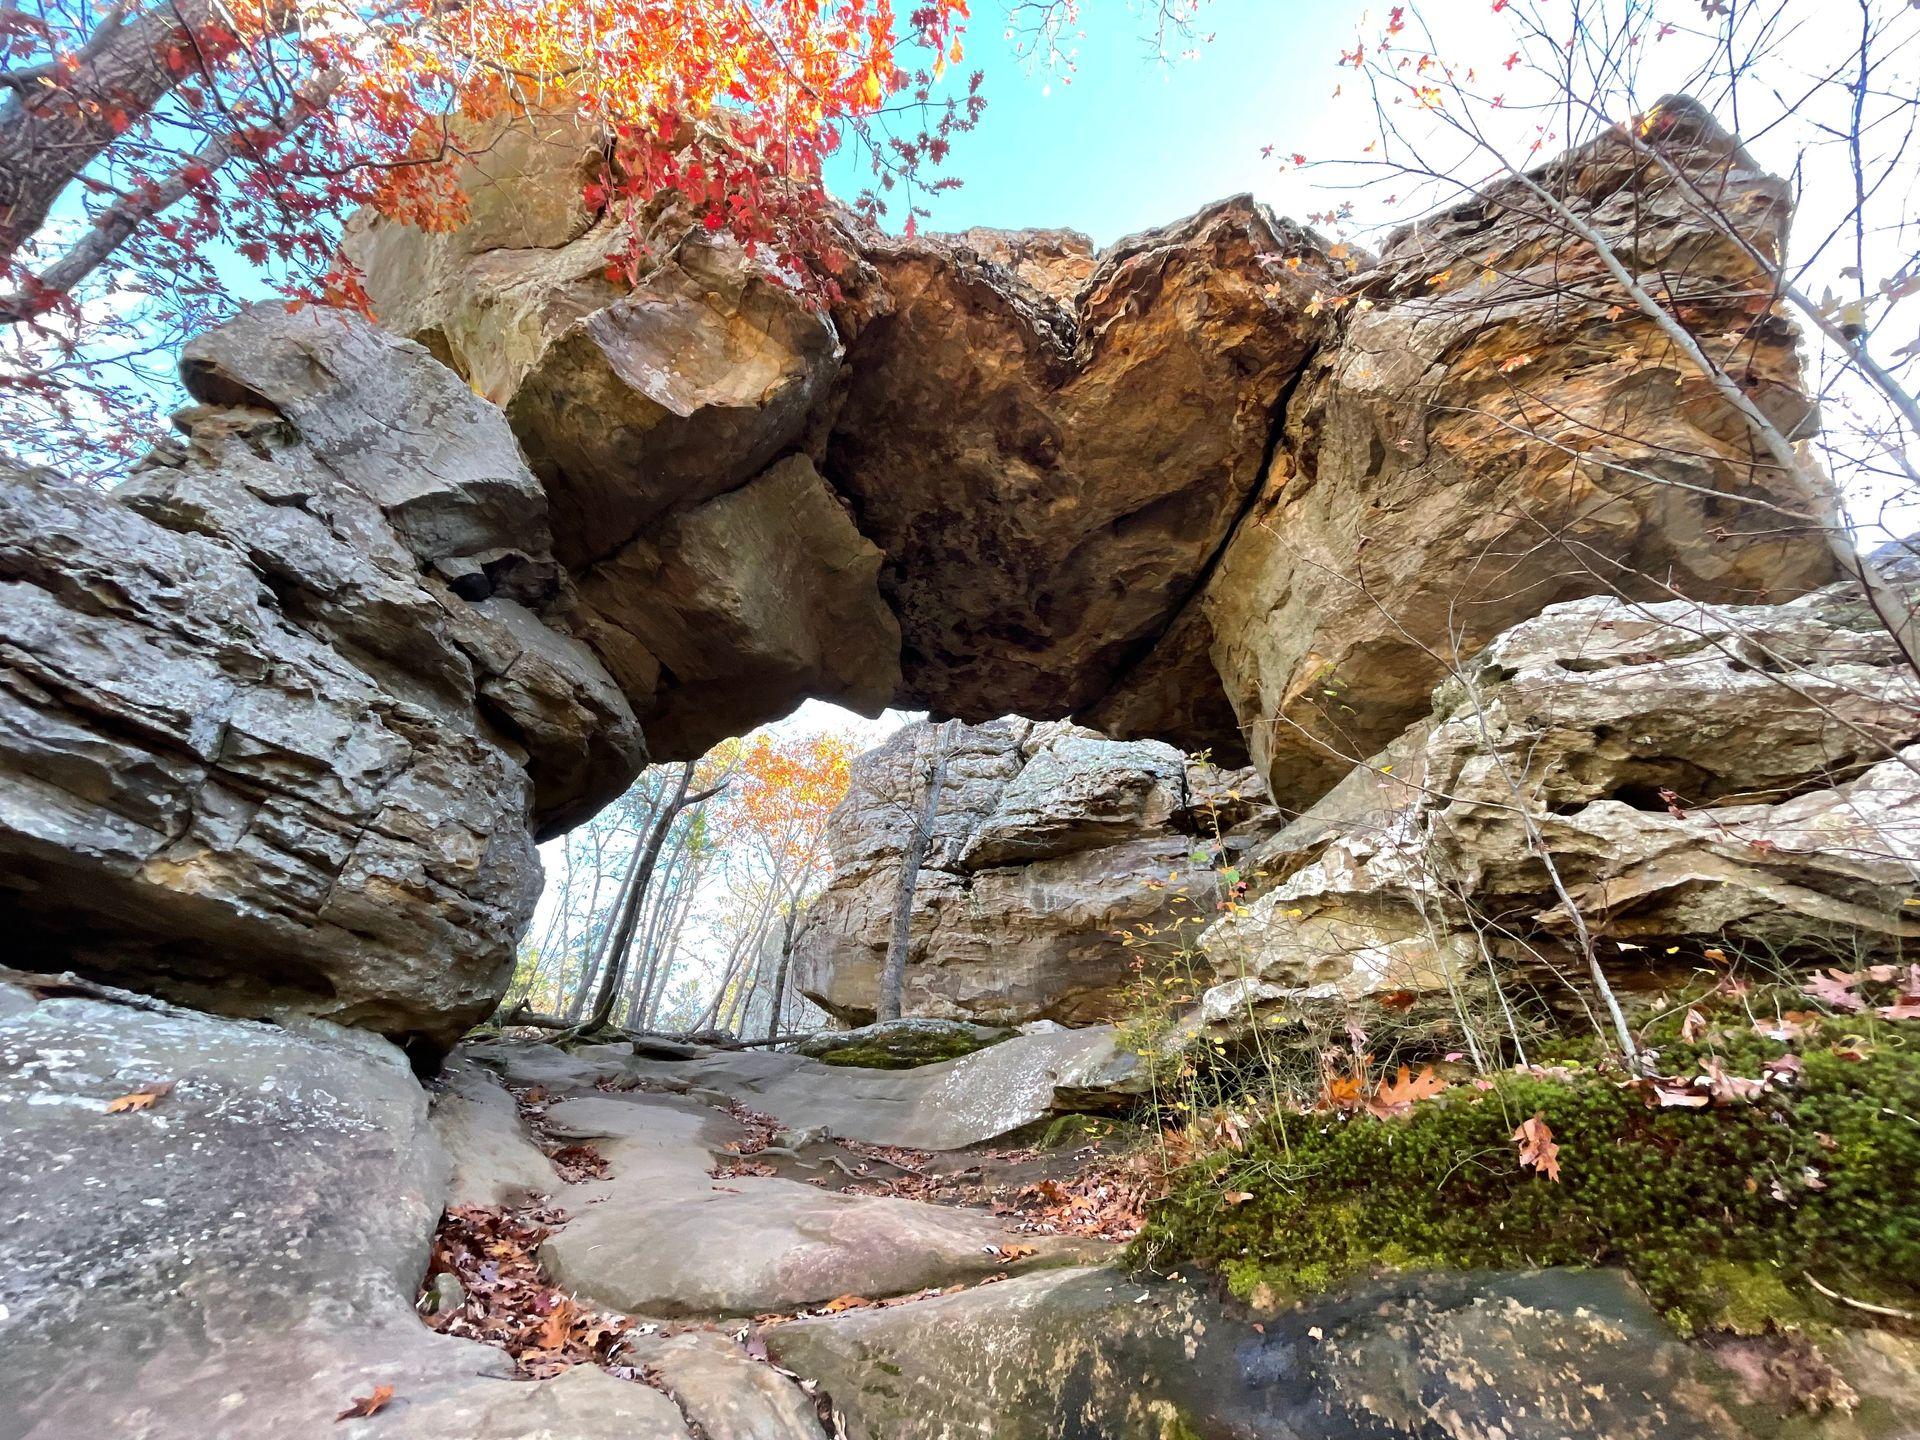 Looking up at a large rock arch on the Seven Hollow trails. The arch looks a bit square and there is a tree with red leaves on the top corner. Some leaves have fallen down onto the rocks.